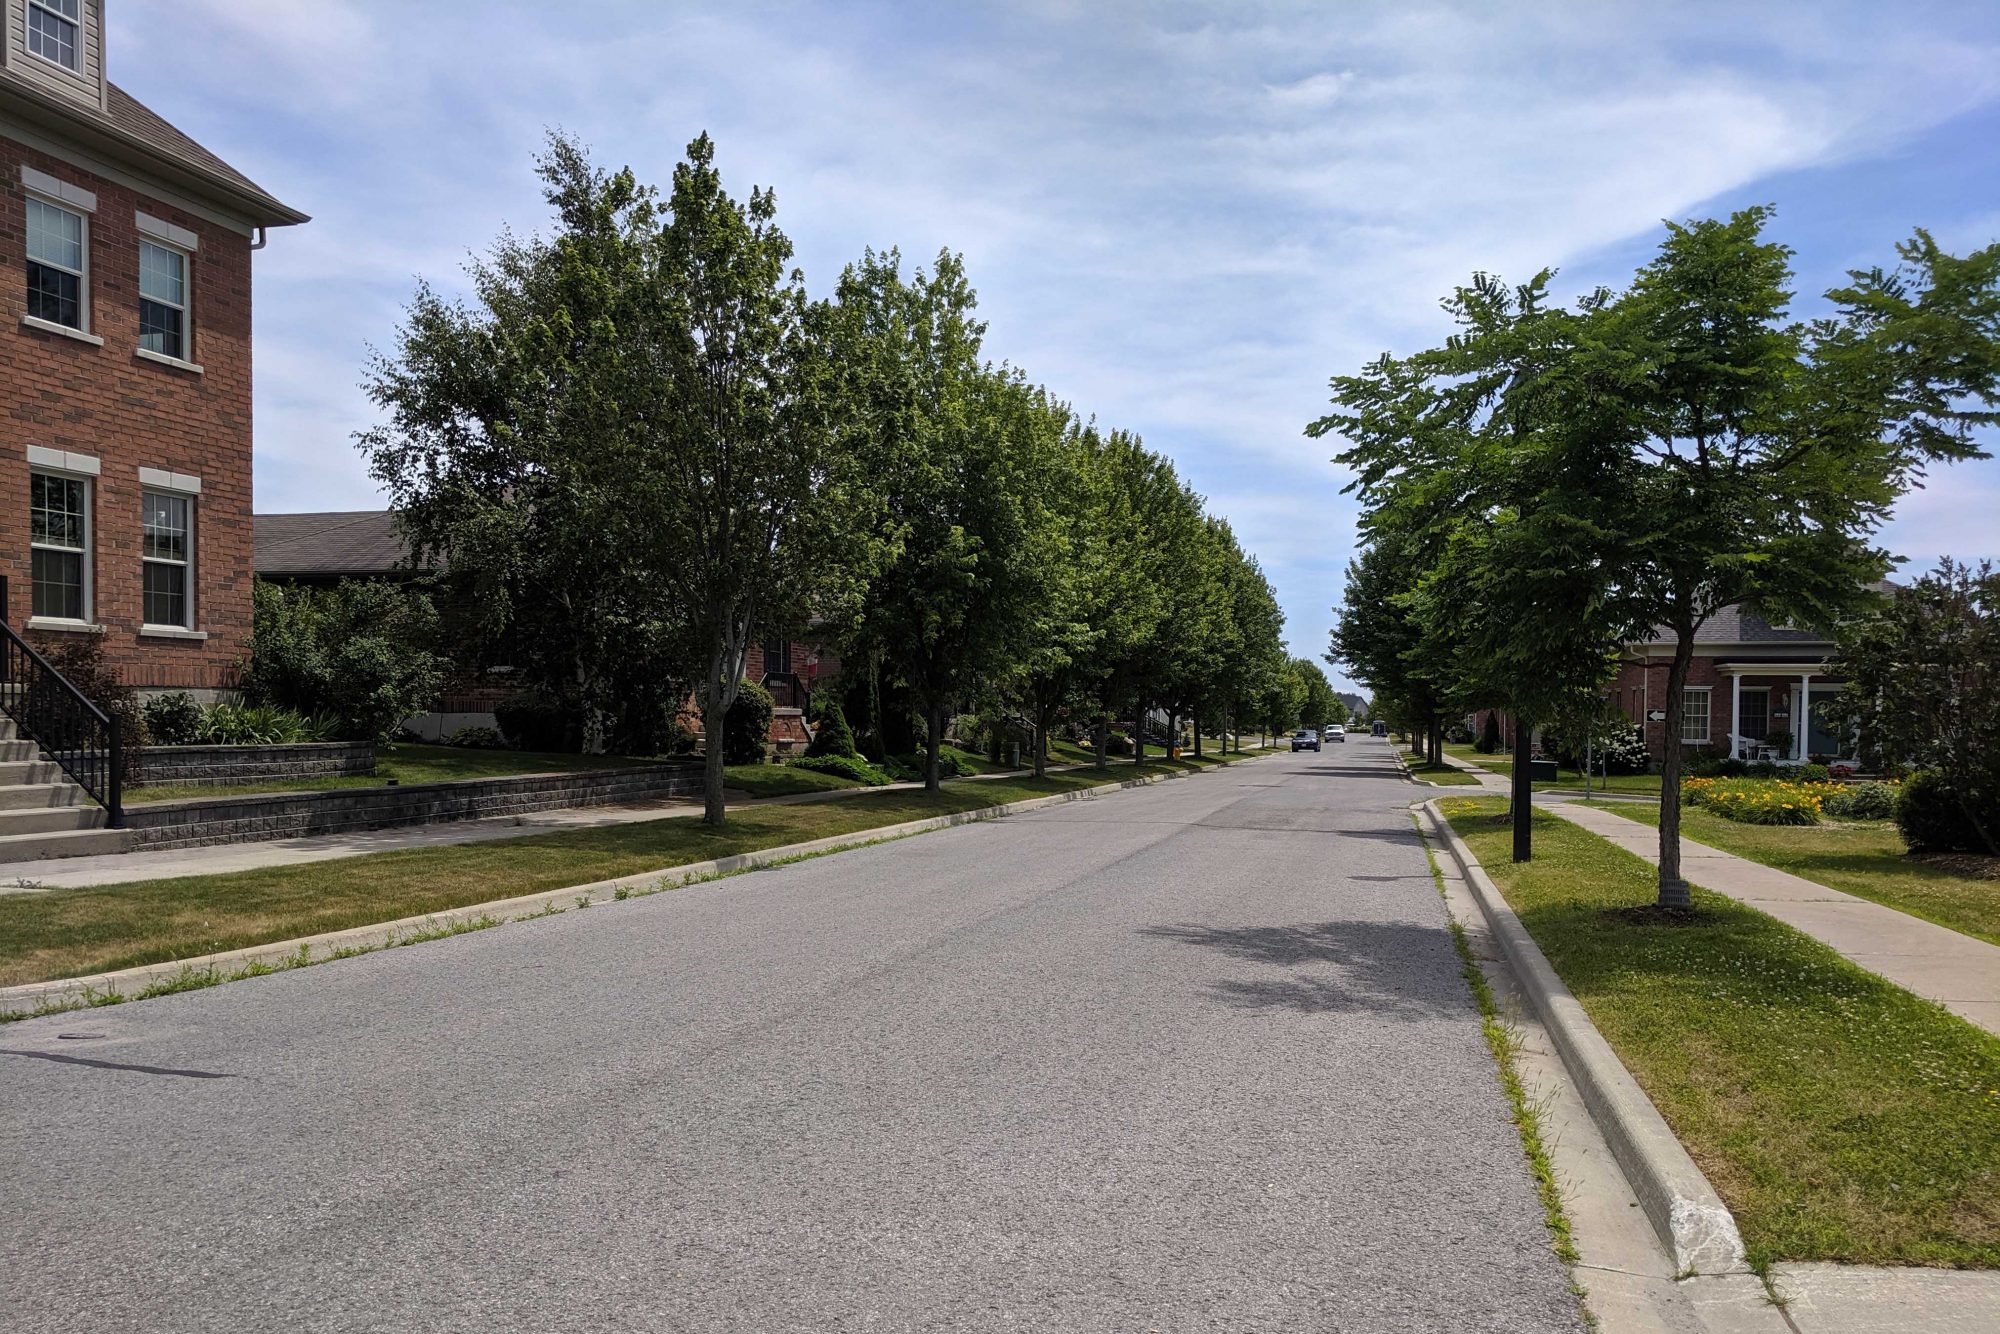 A streetscape with houses and trees in the New Amherst Community.